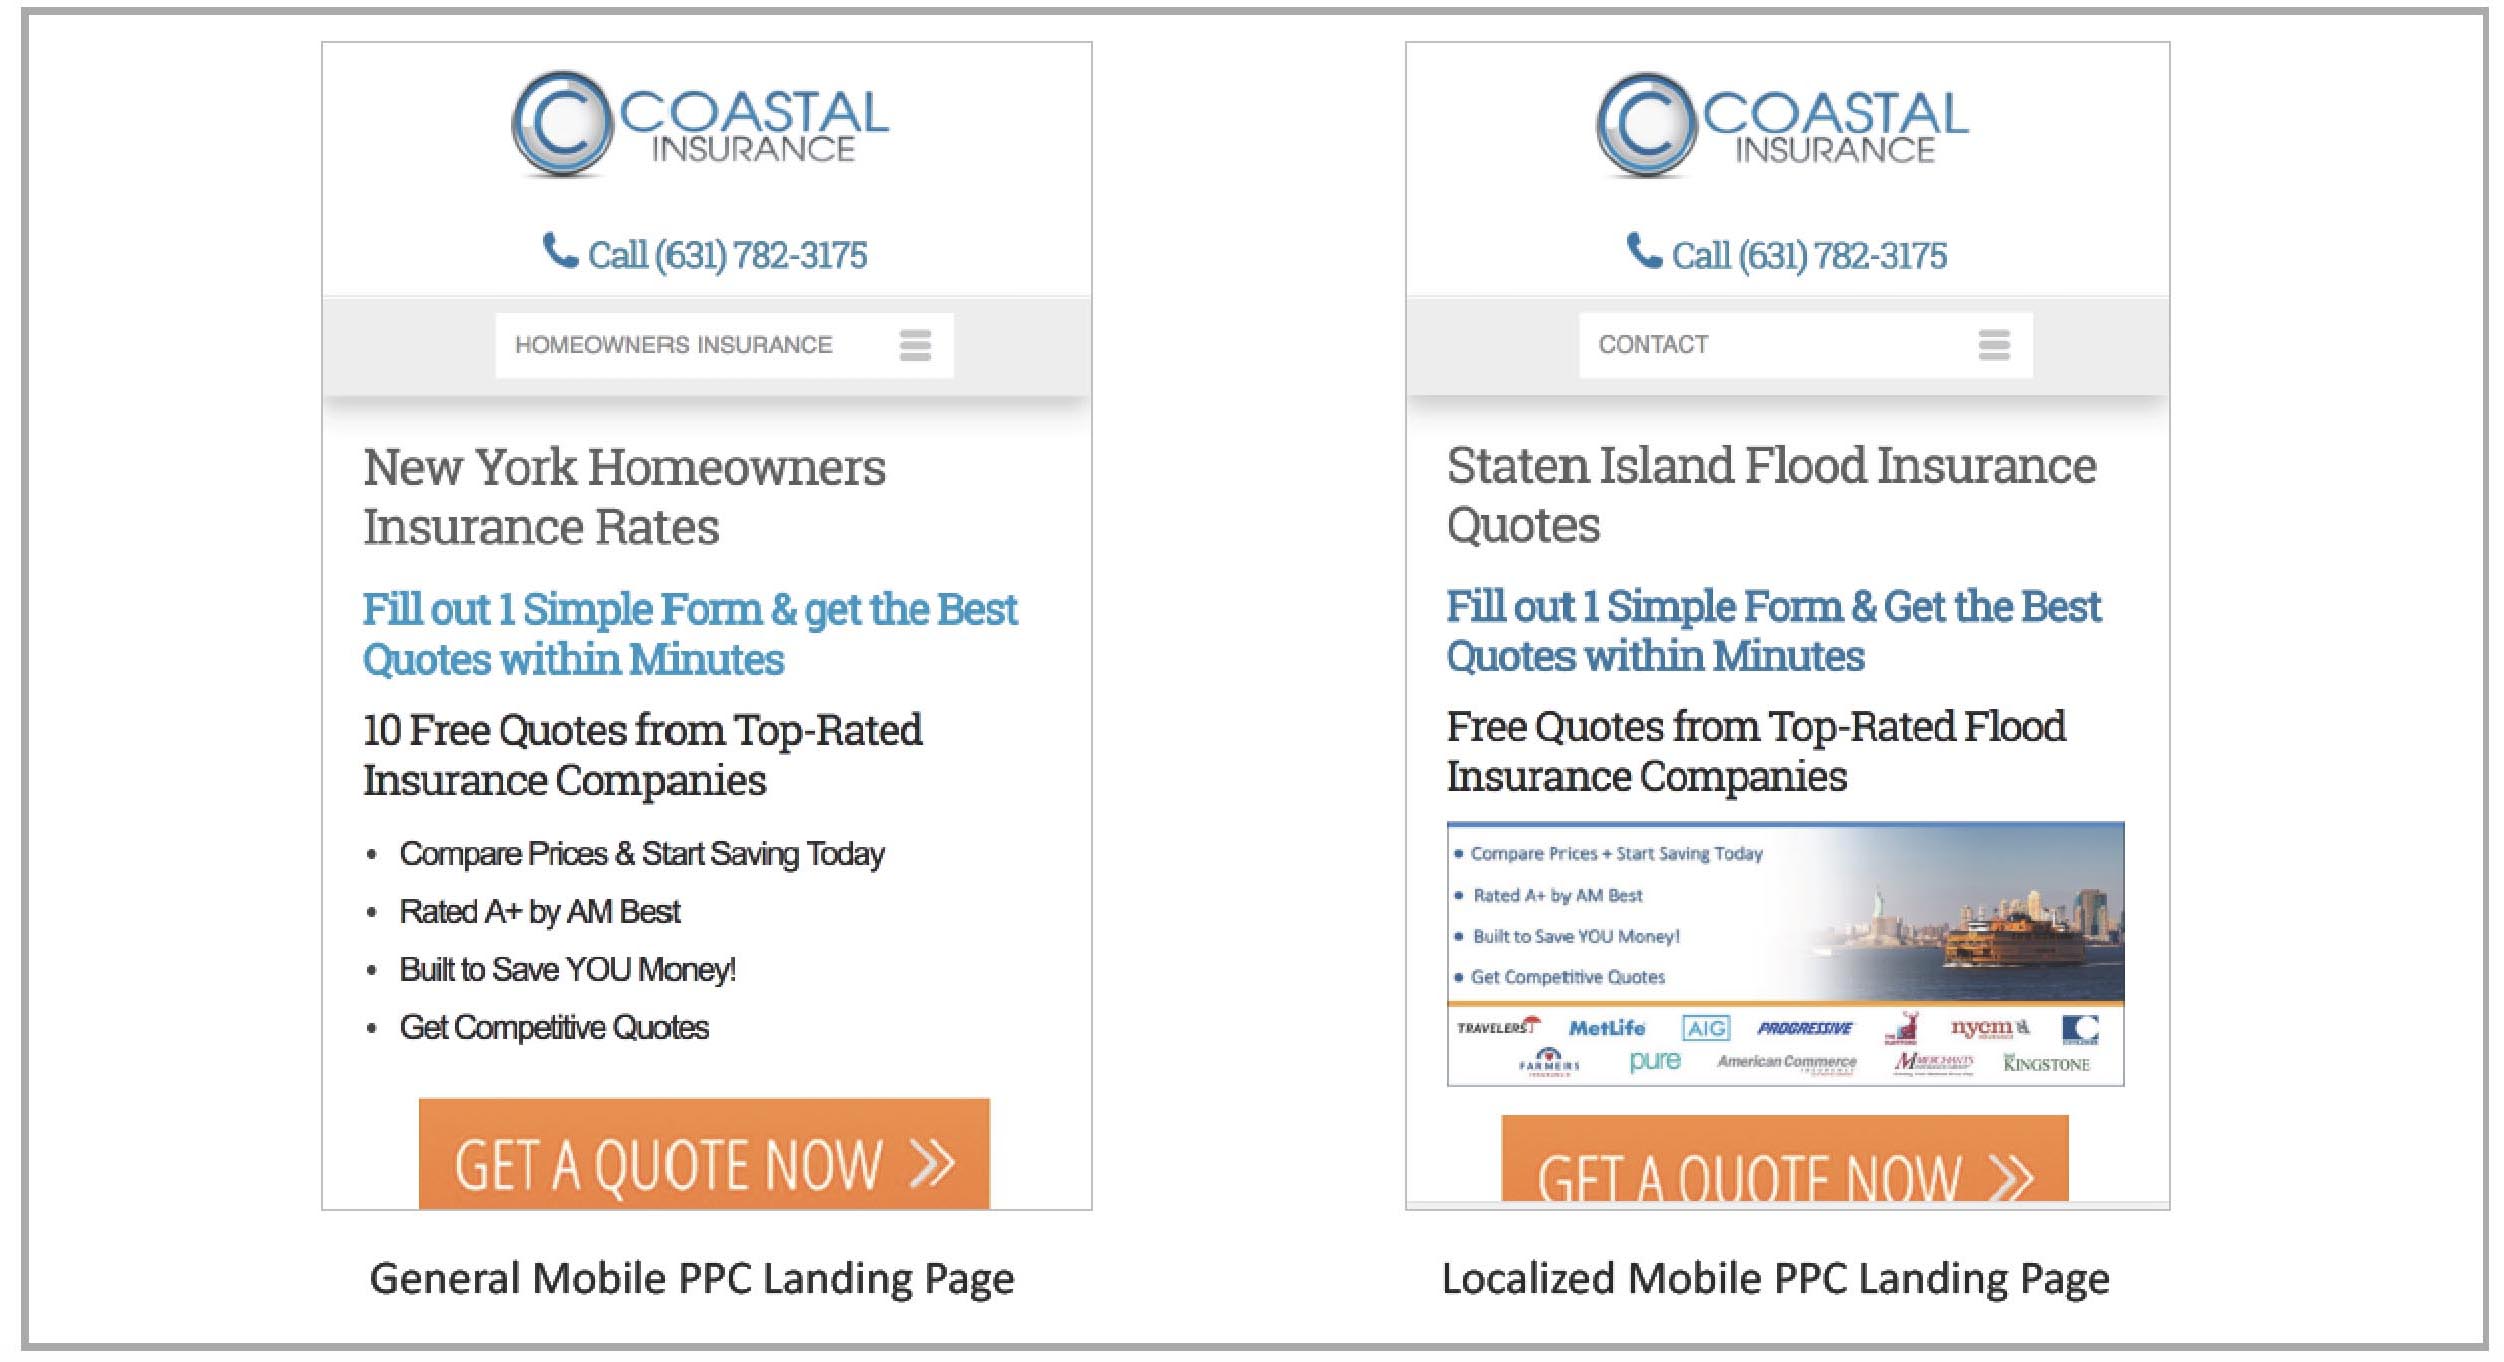 Coastal-General-Mobile-PPC-Landing-Page-and-Localized-Mobile-PPC-Landing-Page